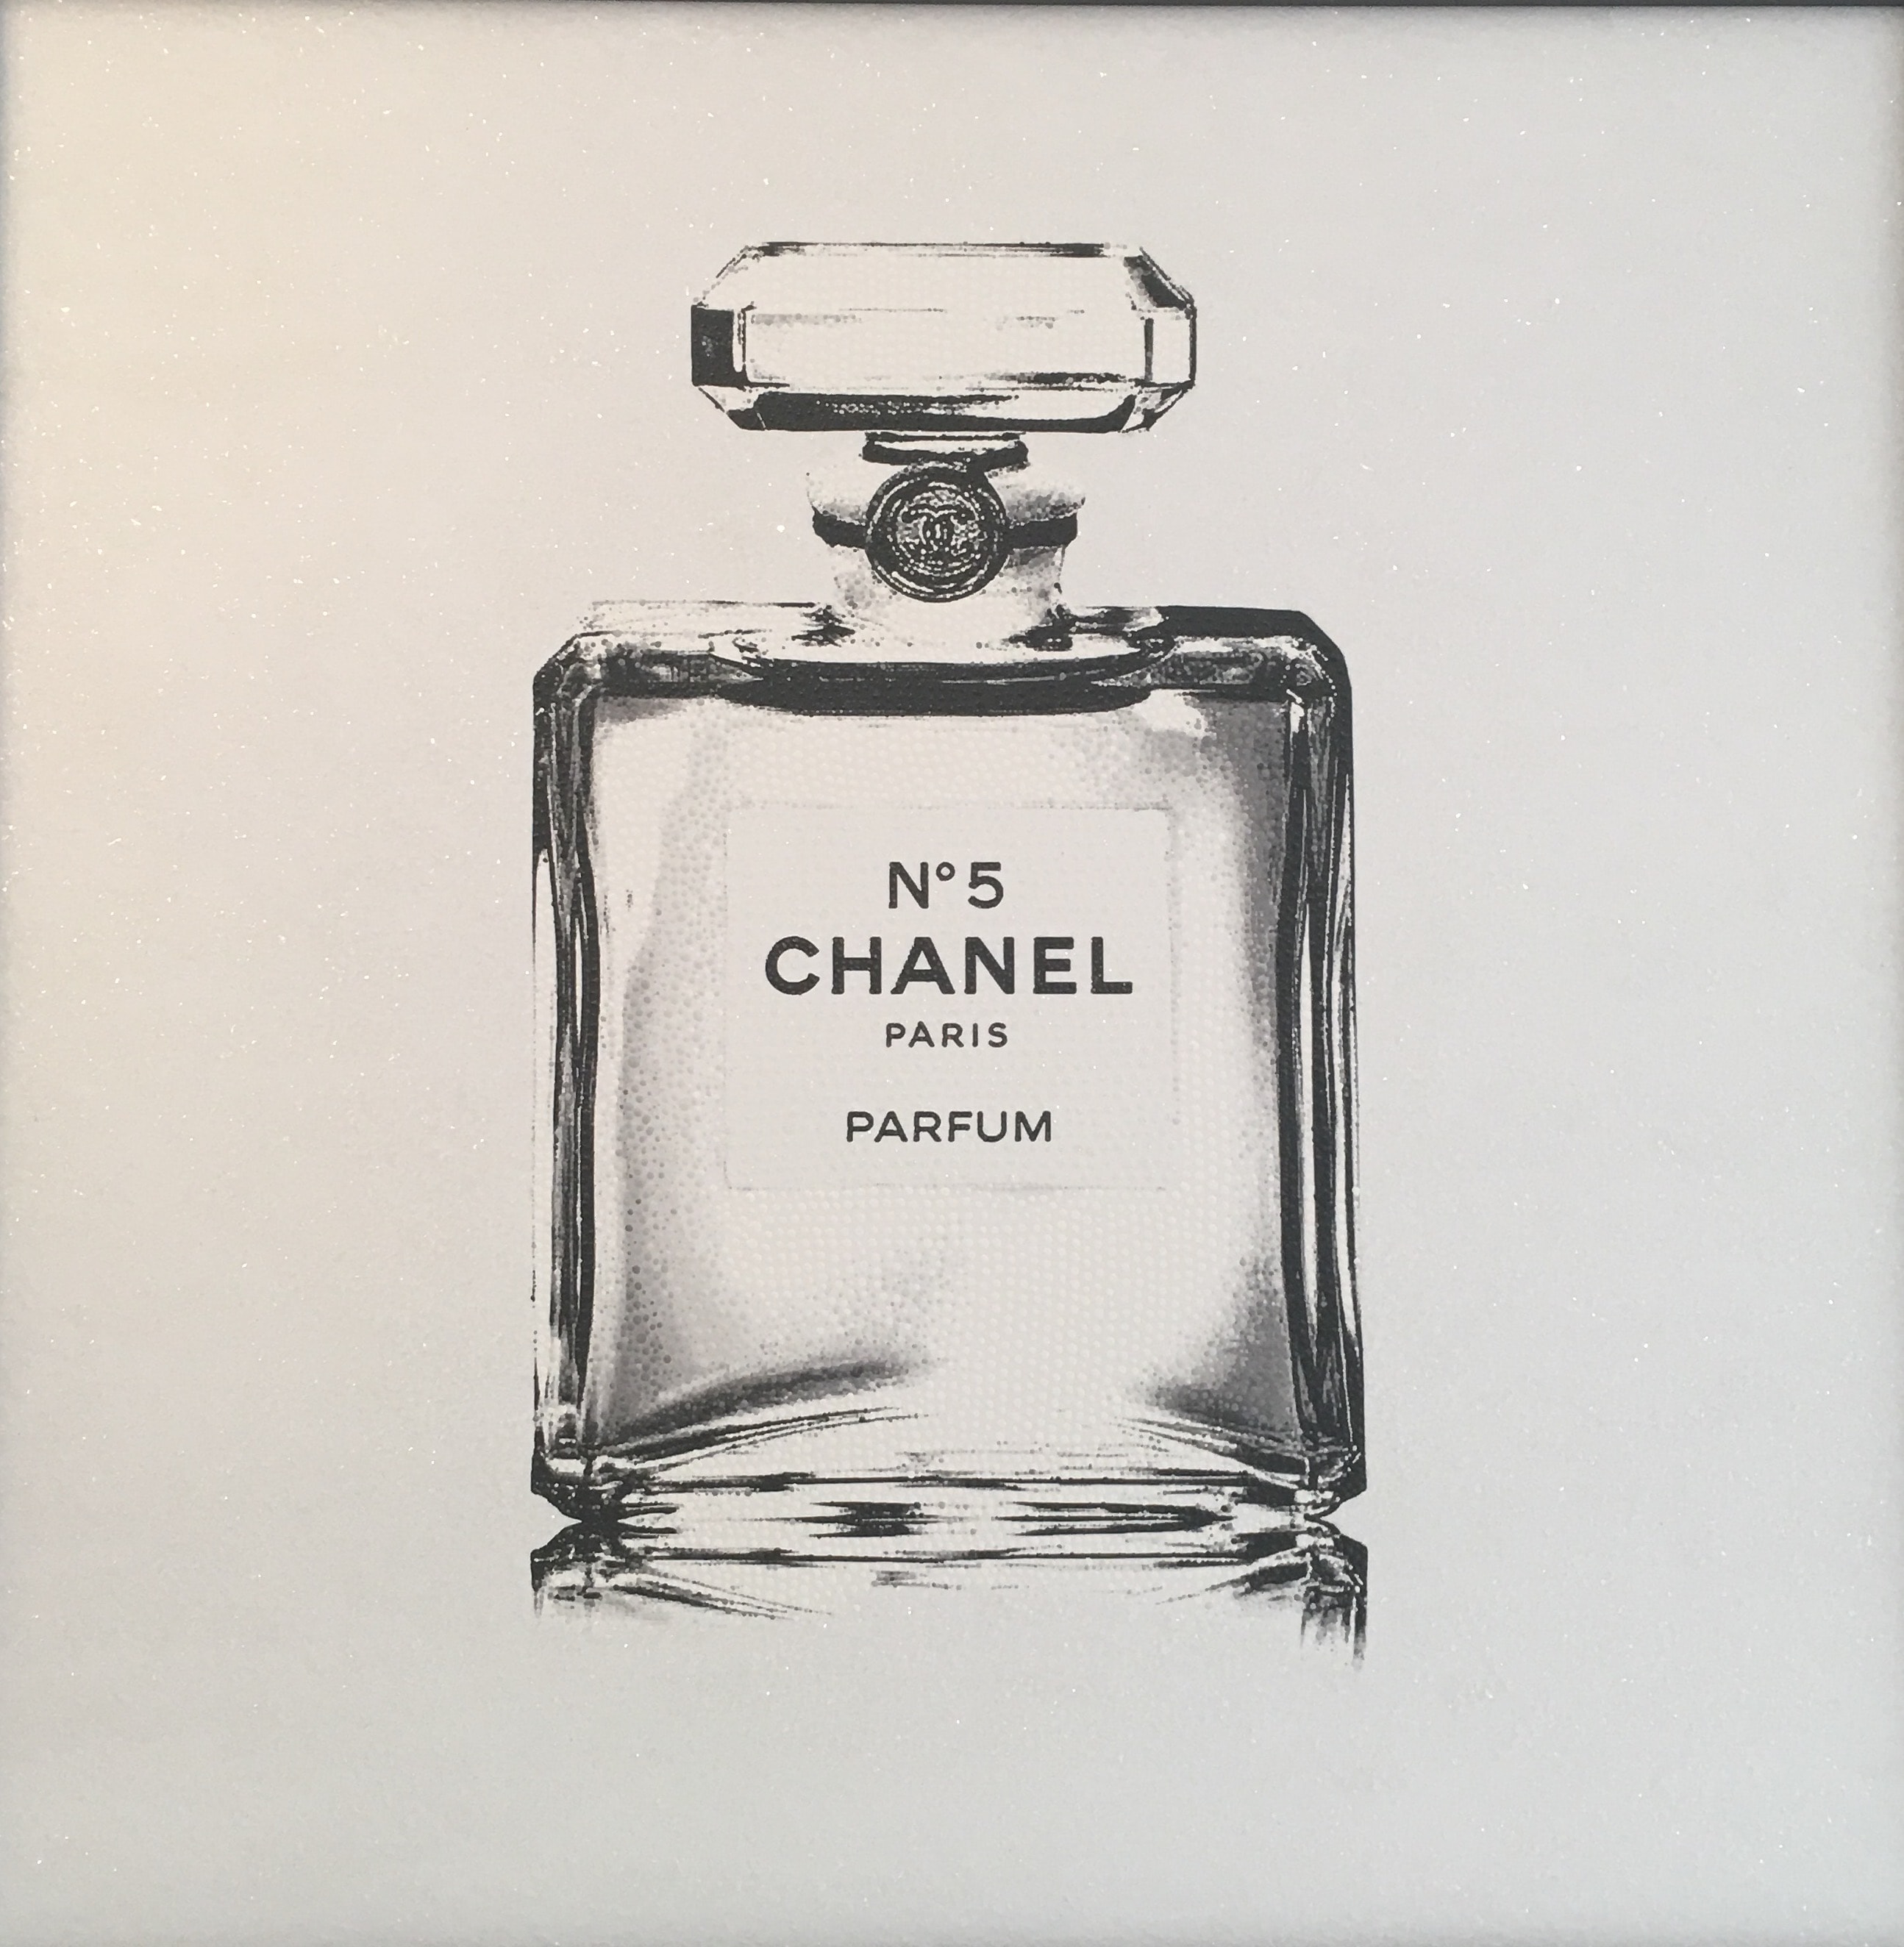 Chanel No 5 Sketch at PaintingValley.com | Explore collection of Chanel ...